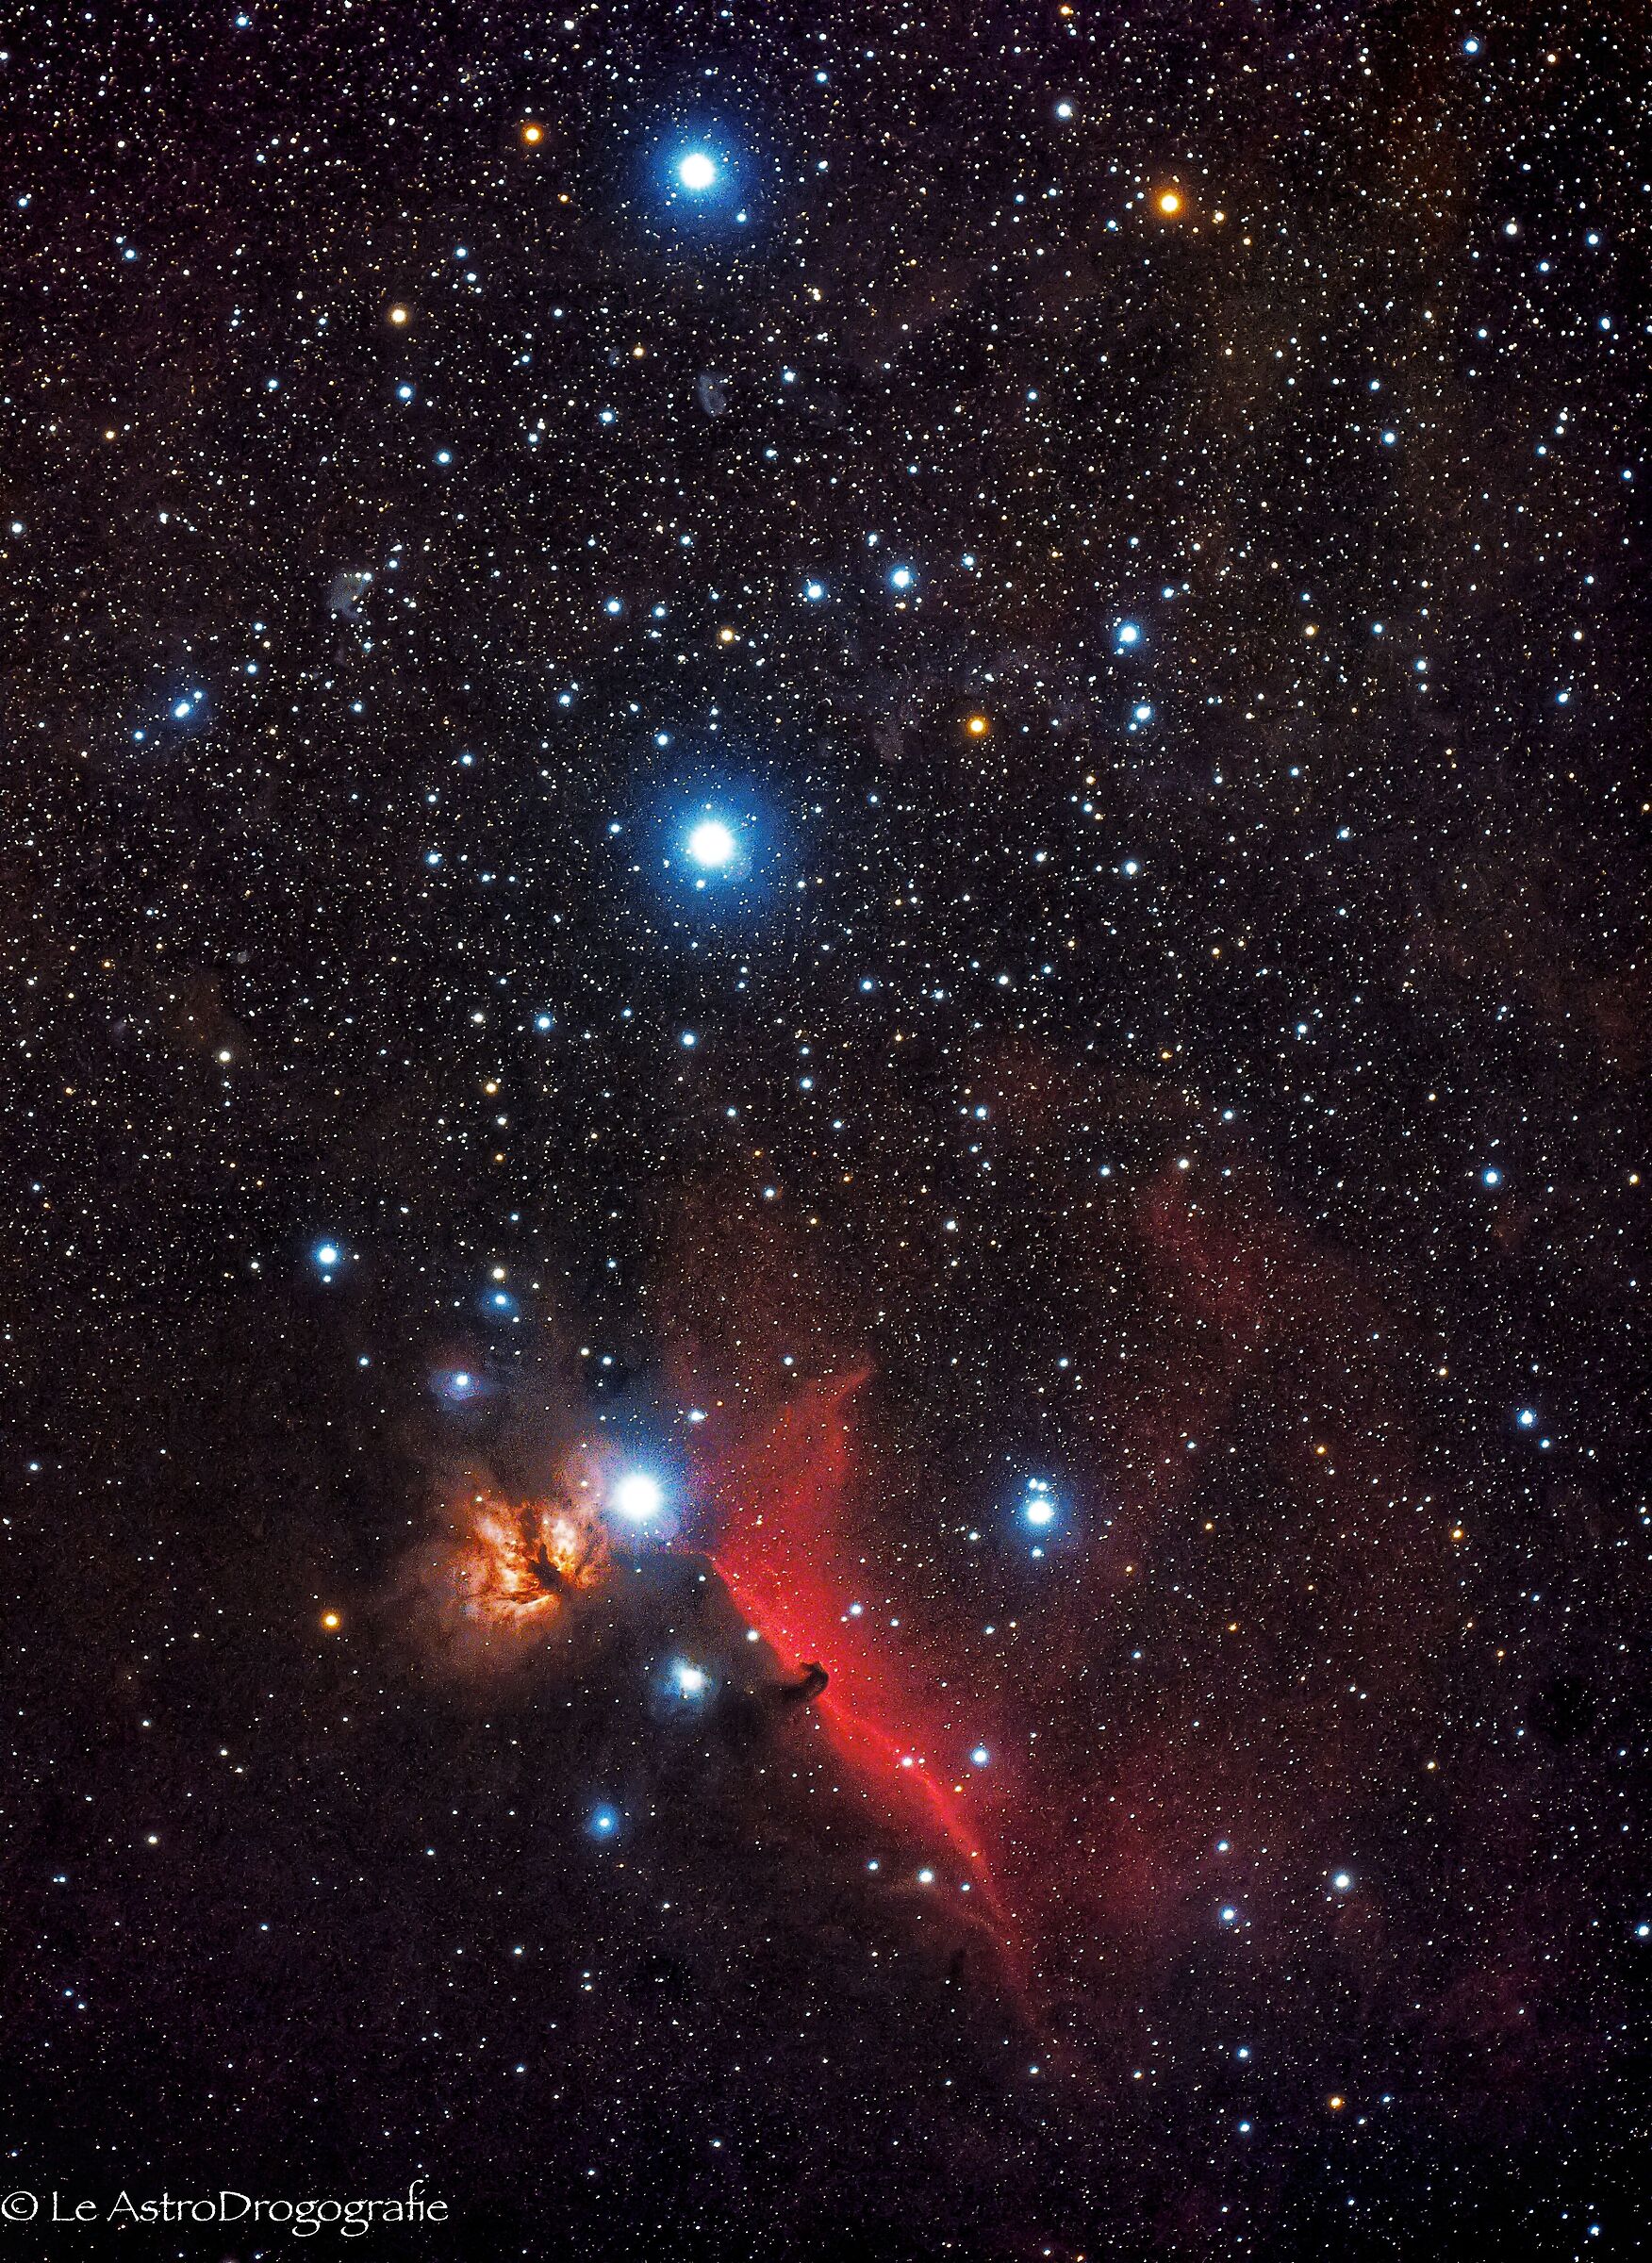 Horse's head in Orion...